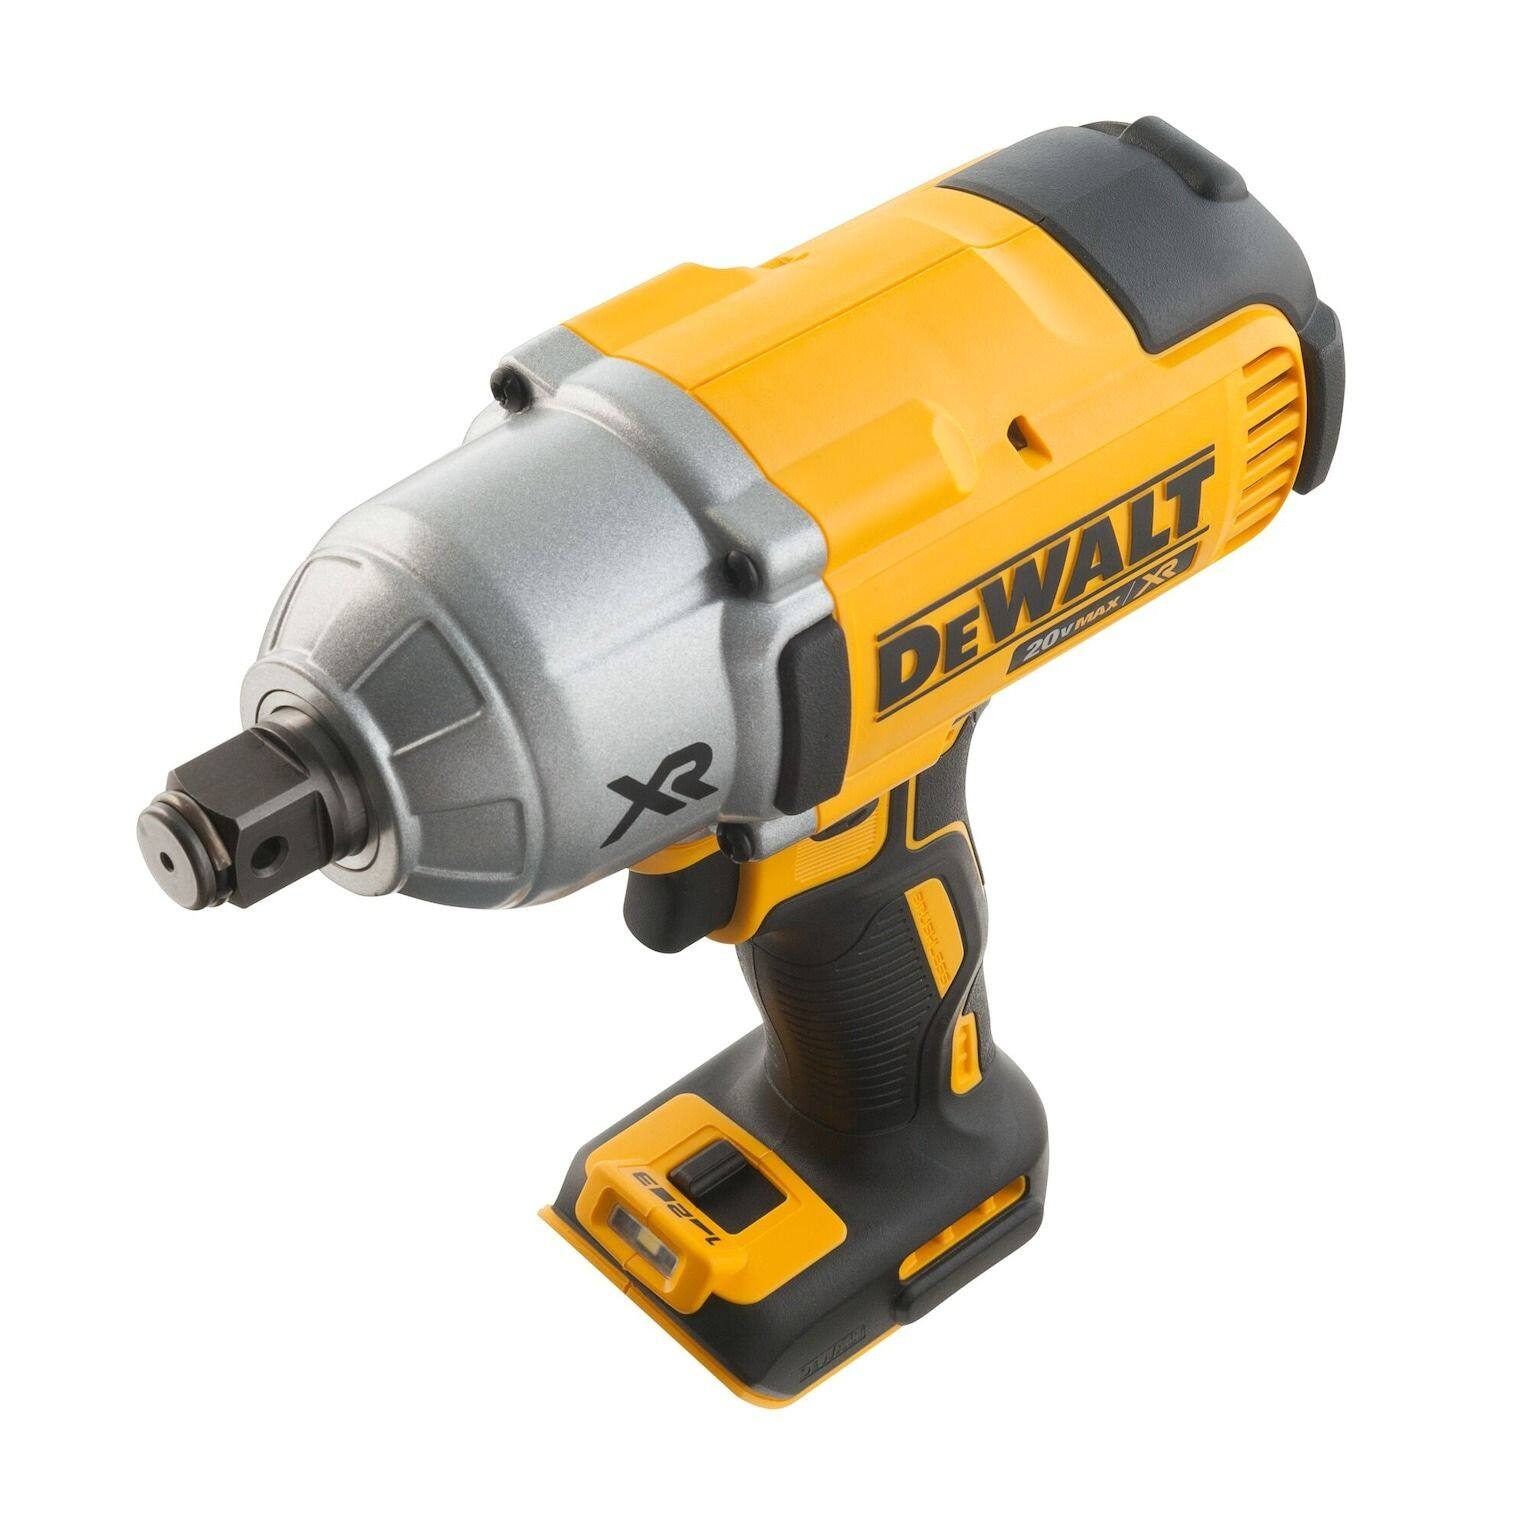 DEWALT DCF897B 20V MAX XR 3 Speed High Torque Brushless Impact Wrench with  Detent Pin, 3/4-in, Tool Only